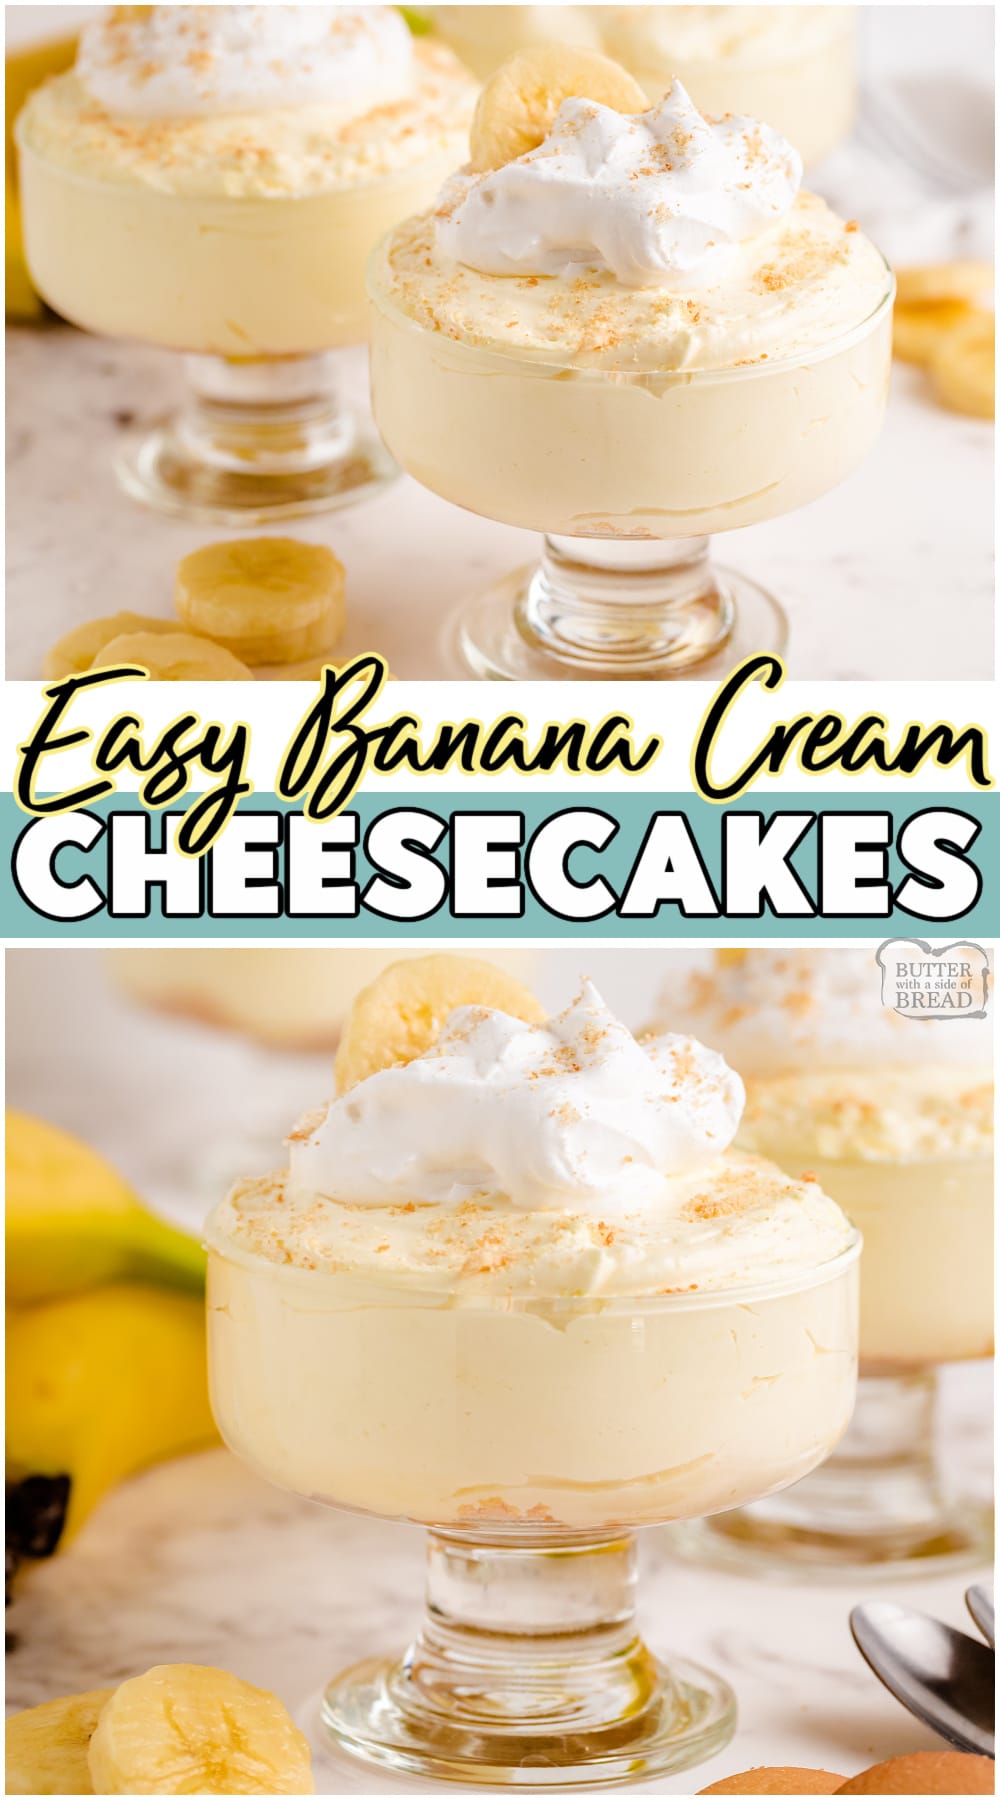 Banana Cream Cheesecakes made with banana pudding, cream cheese, whipped topping, and a graham cracker. Fantastic creamy, banana flavor in this easy cheesecake recipe! #cheesecake #banana #dessert #easyrecipe from BUTTER WITH A SIDE OF BREAD